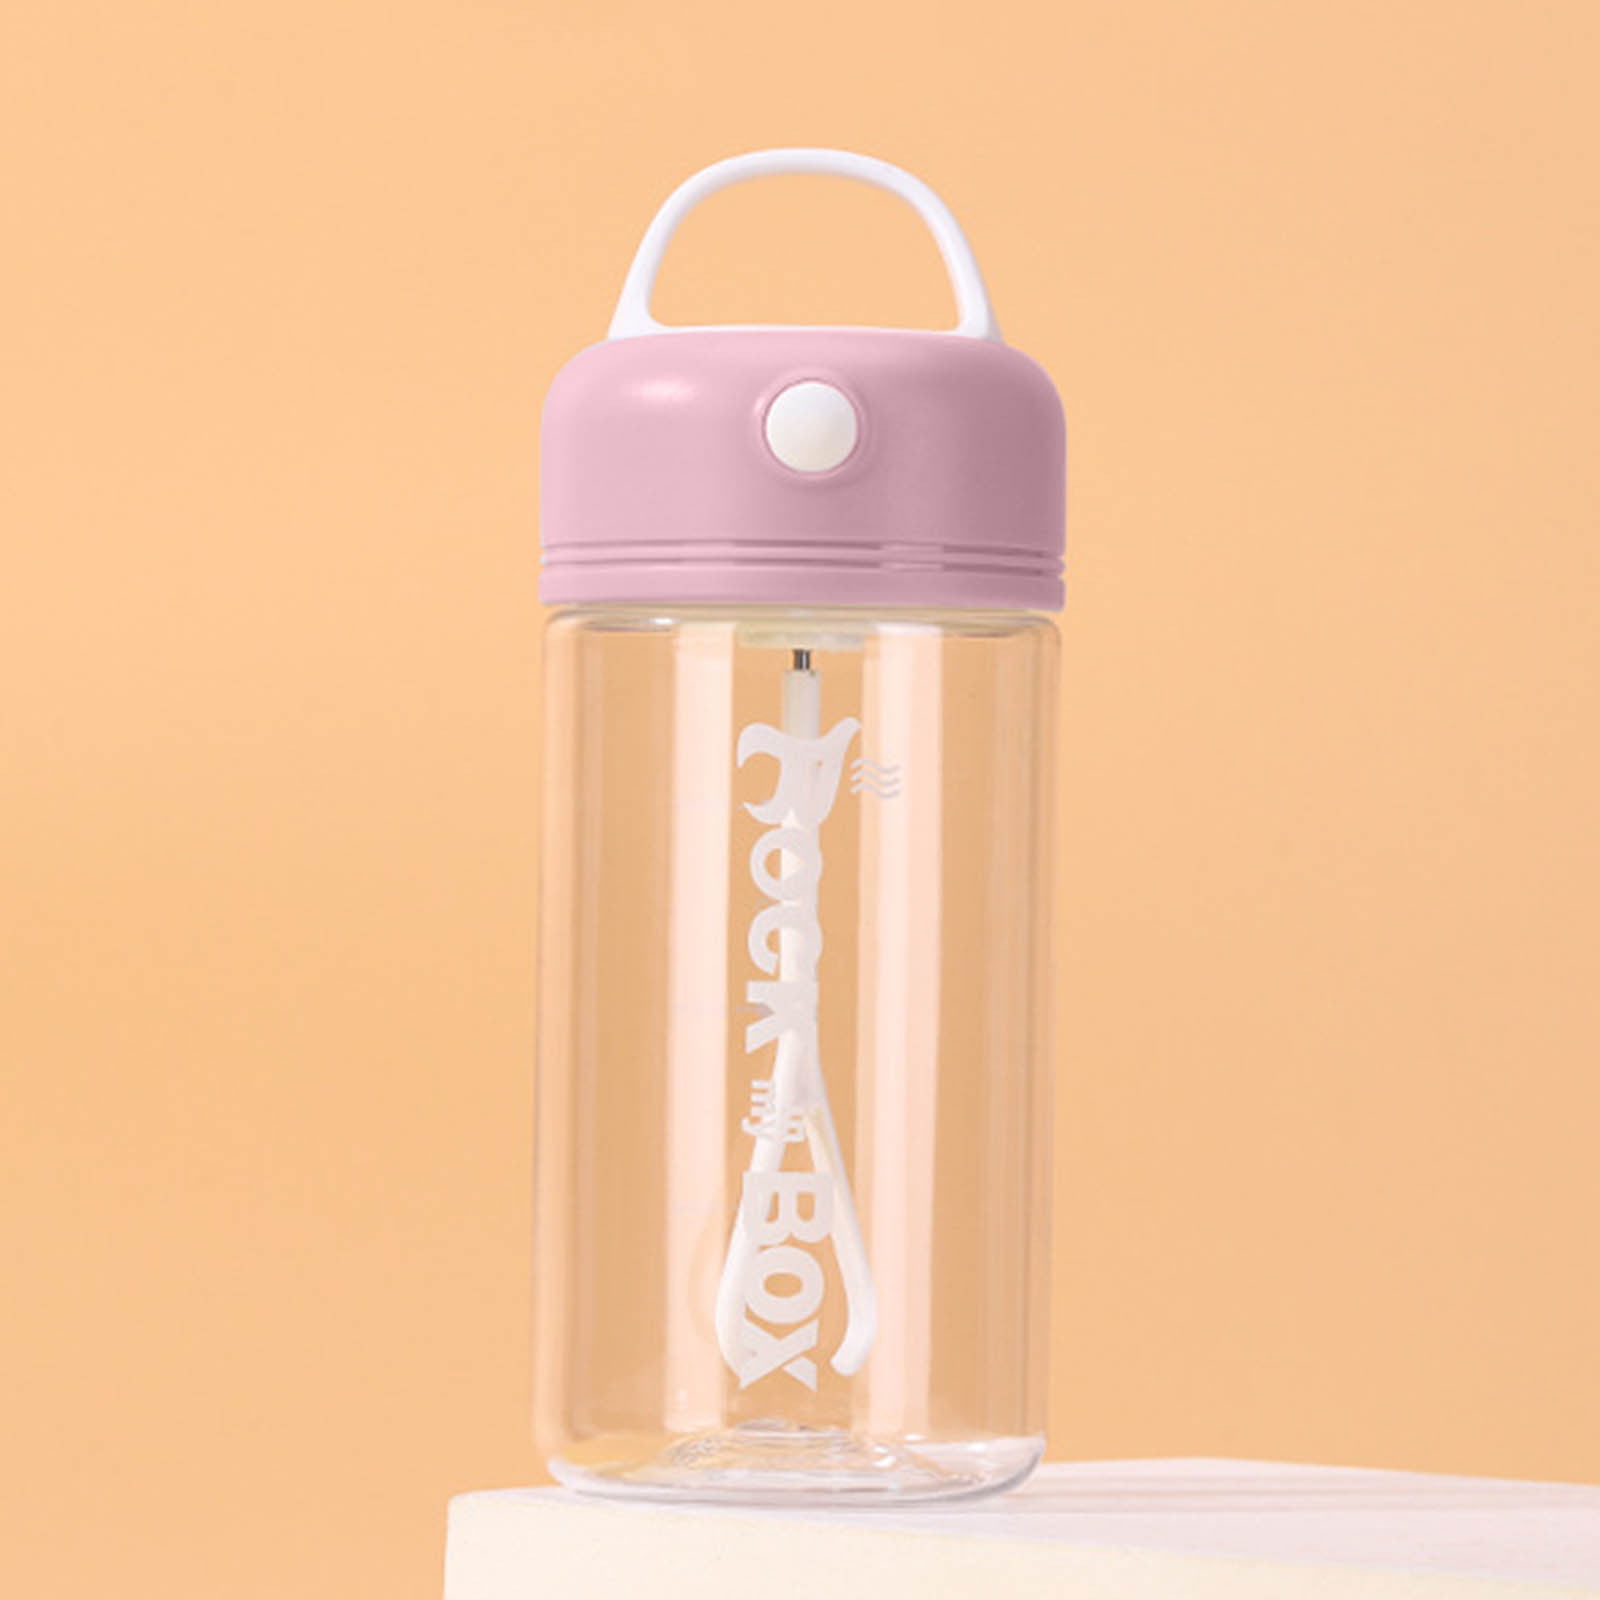 Camidy Electric Shaker Bottle- Portable USB Rechargeable Protein Shake  Mixer, Shaker Cups for Protei…See more Camidy Electric Shaker Bottle-  Portable